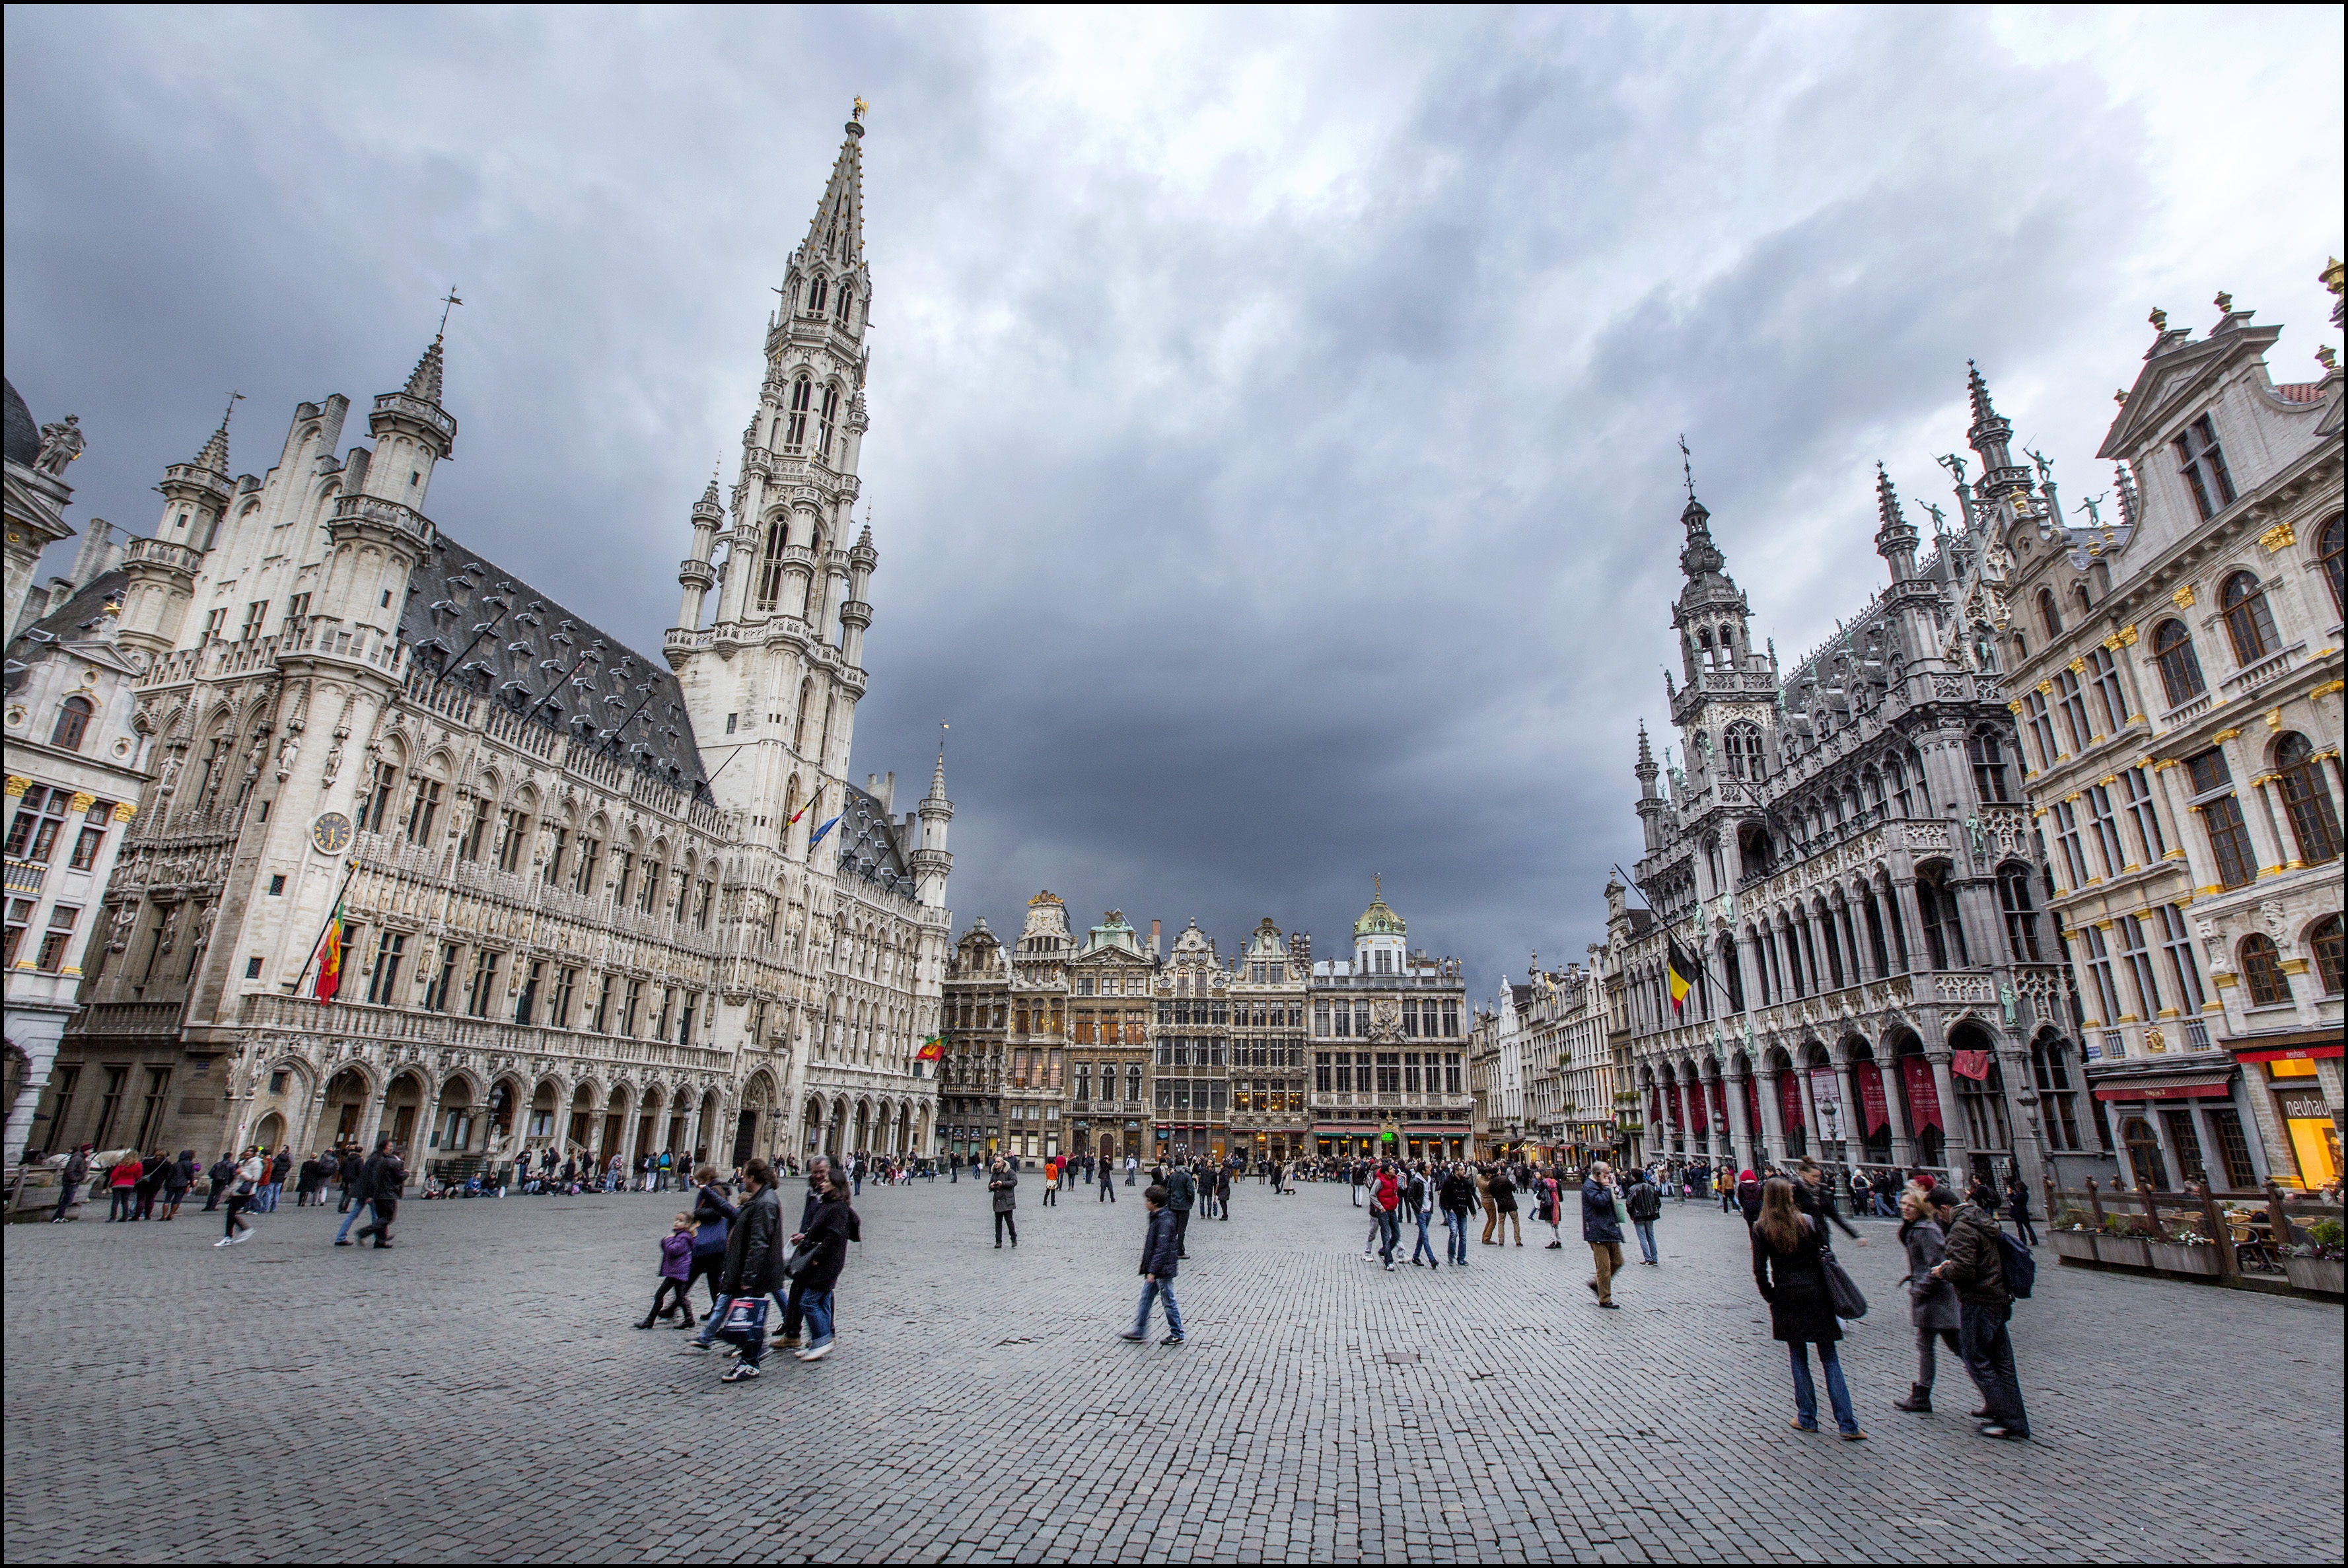 The President Brussels Hotel - Grand Place Brussels